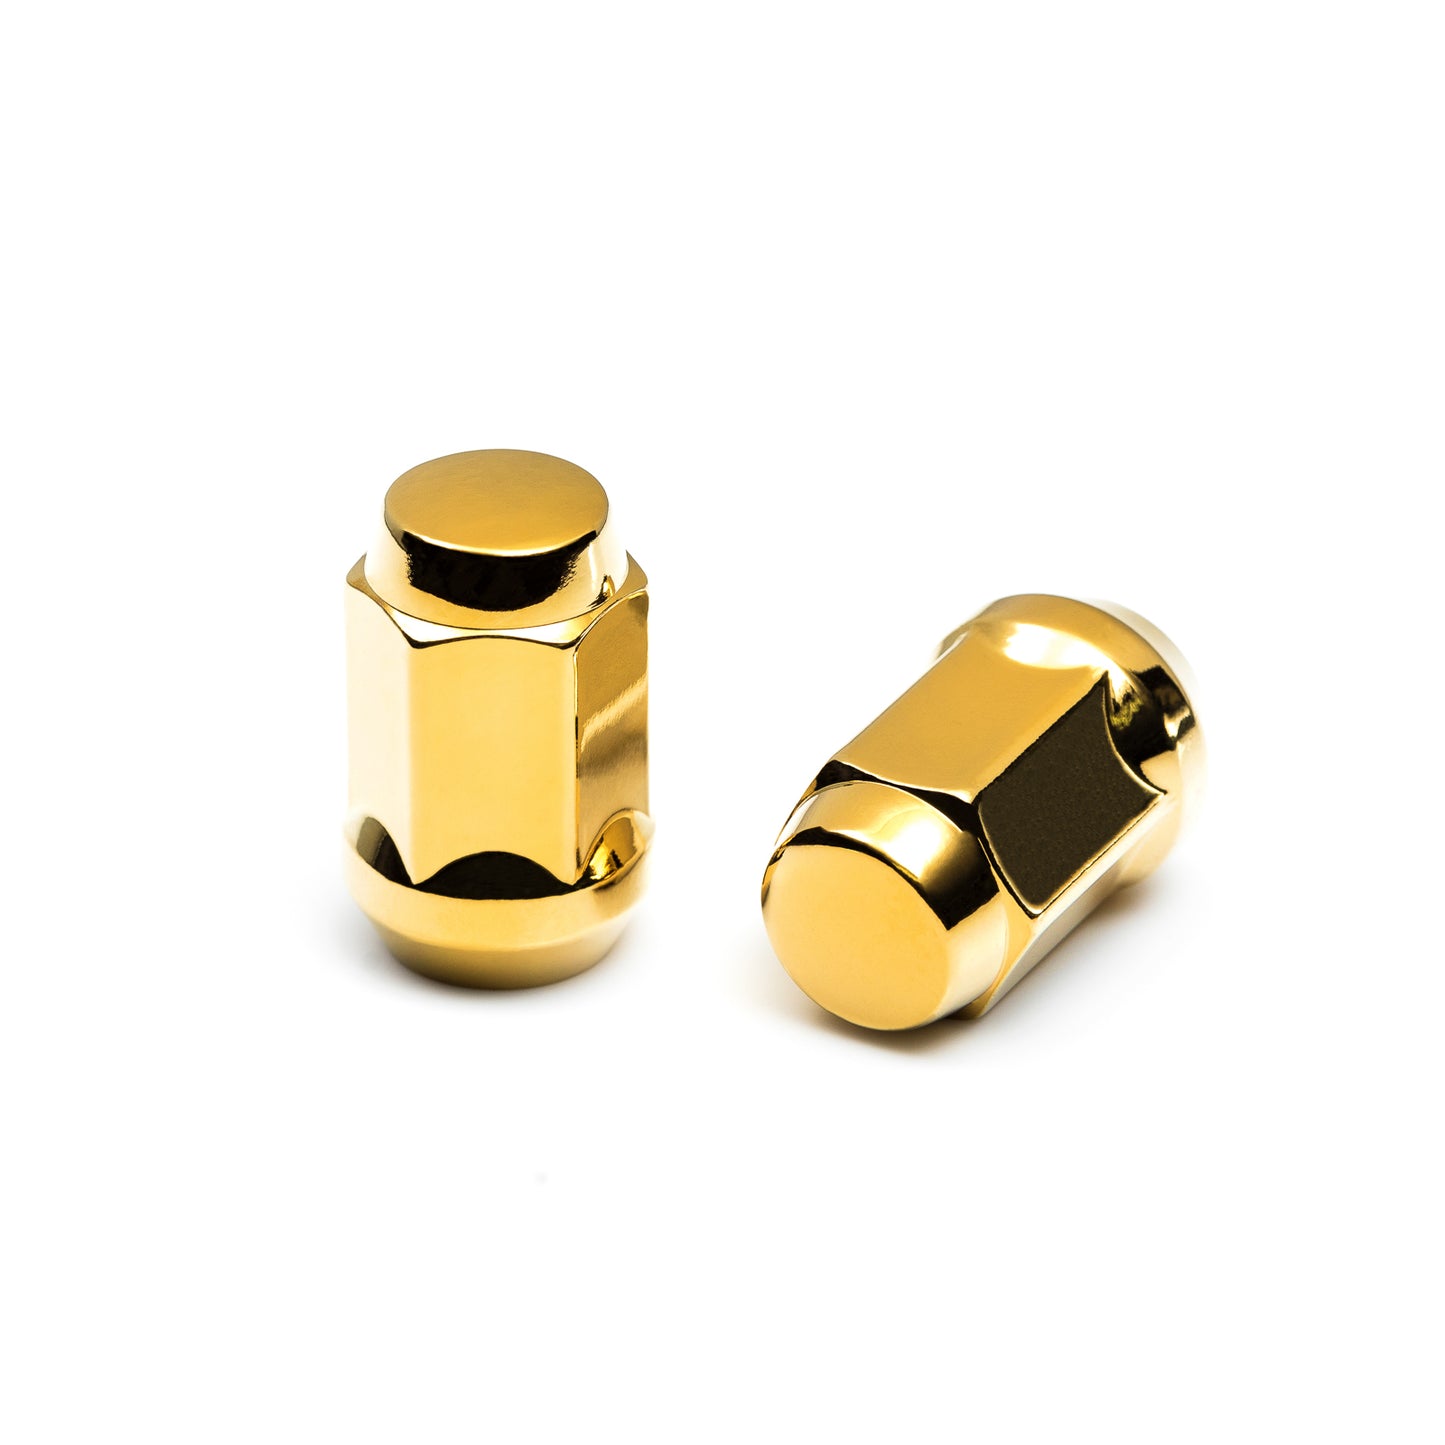 Conical Seat Lug Nuts - Gold